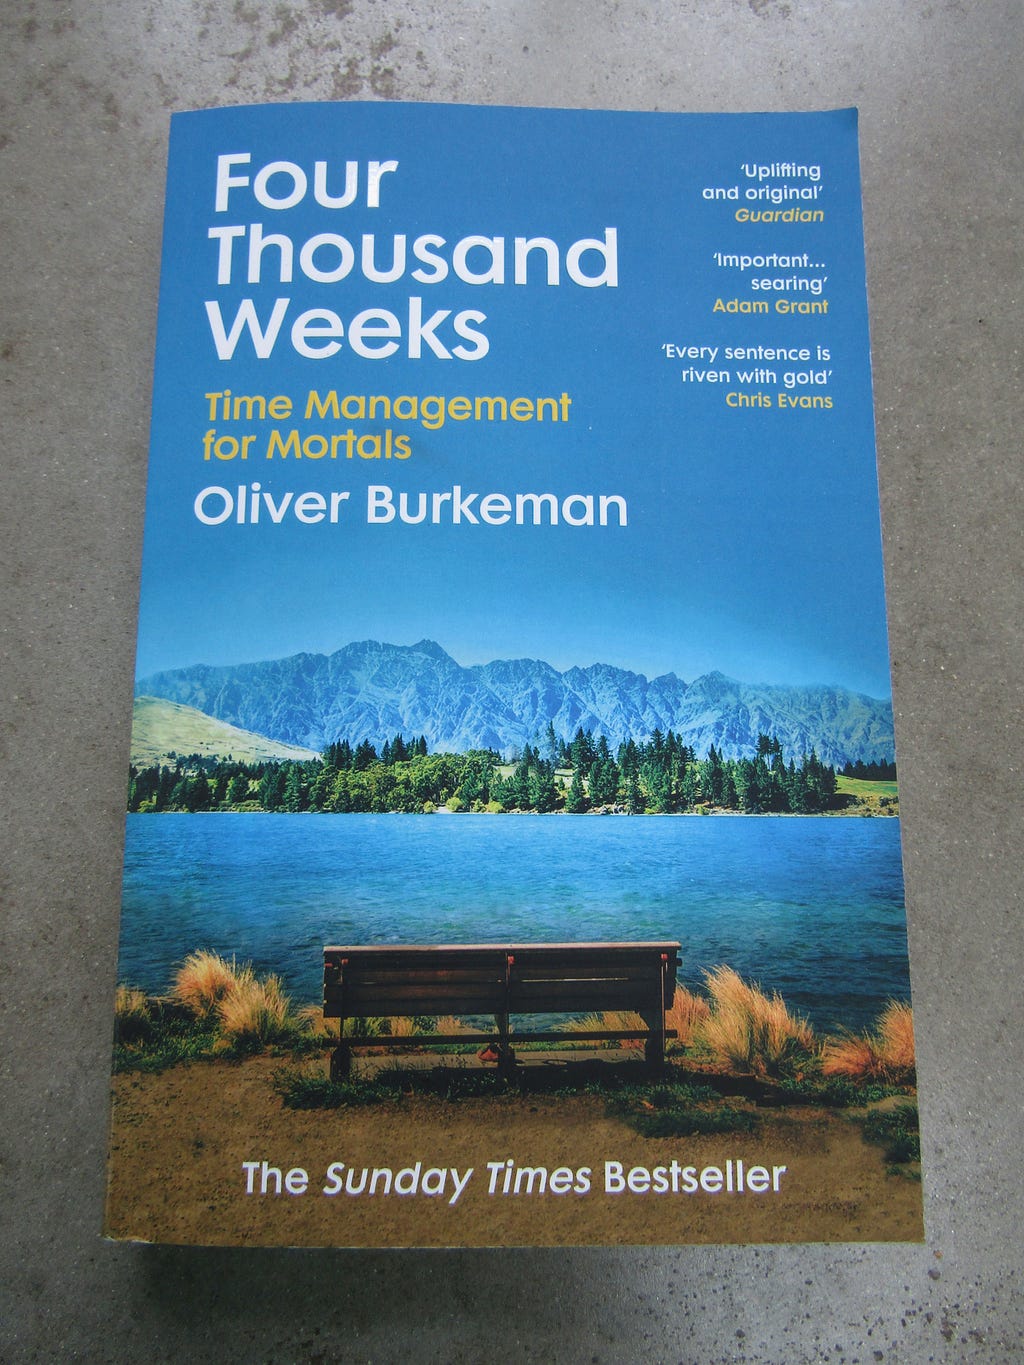 Four Thousand Weeks by Oliver Burkeman